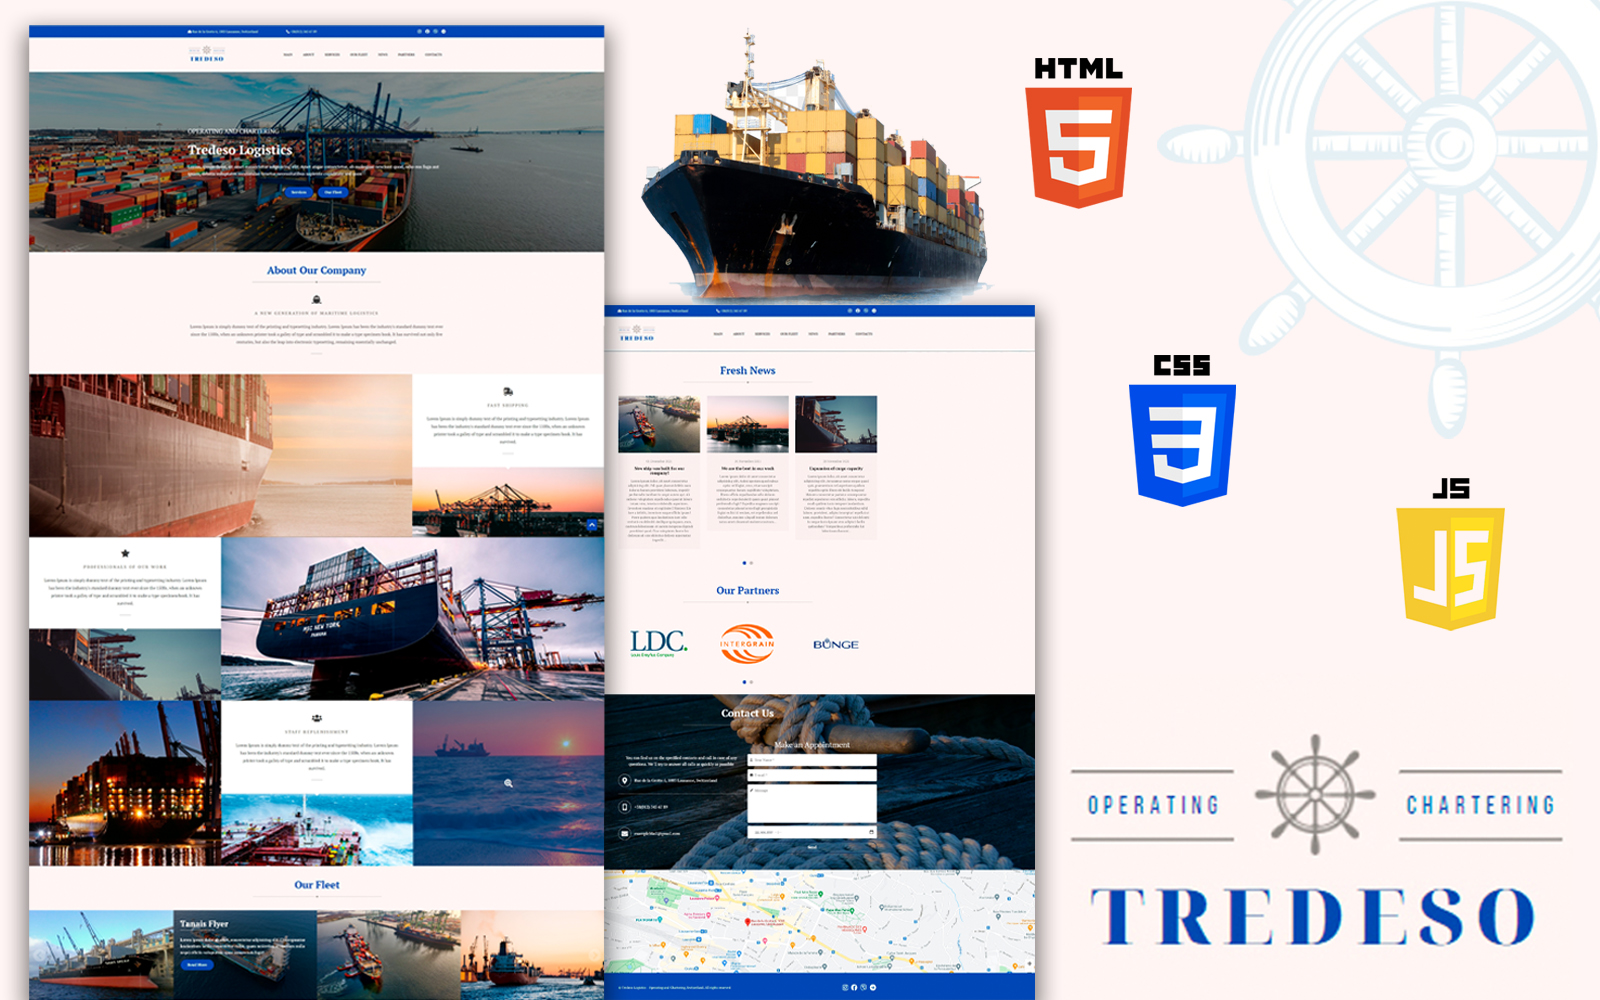 Tredeso - Operating and Chartering HTML5 Landing Page Template